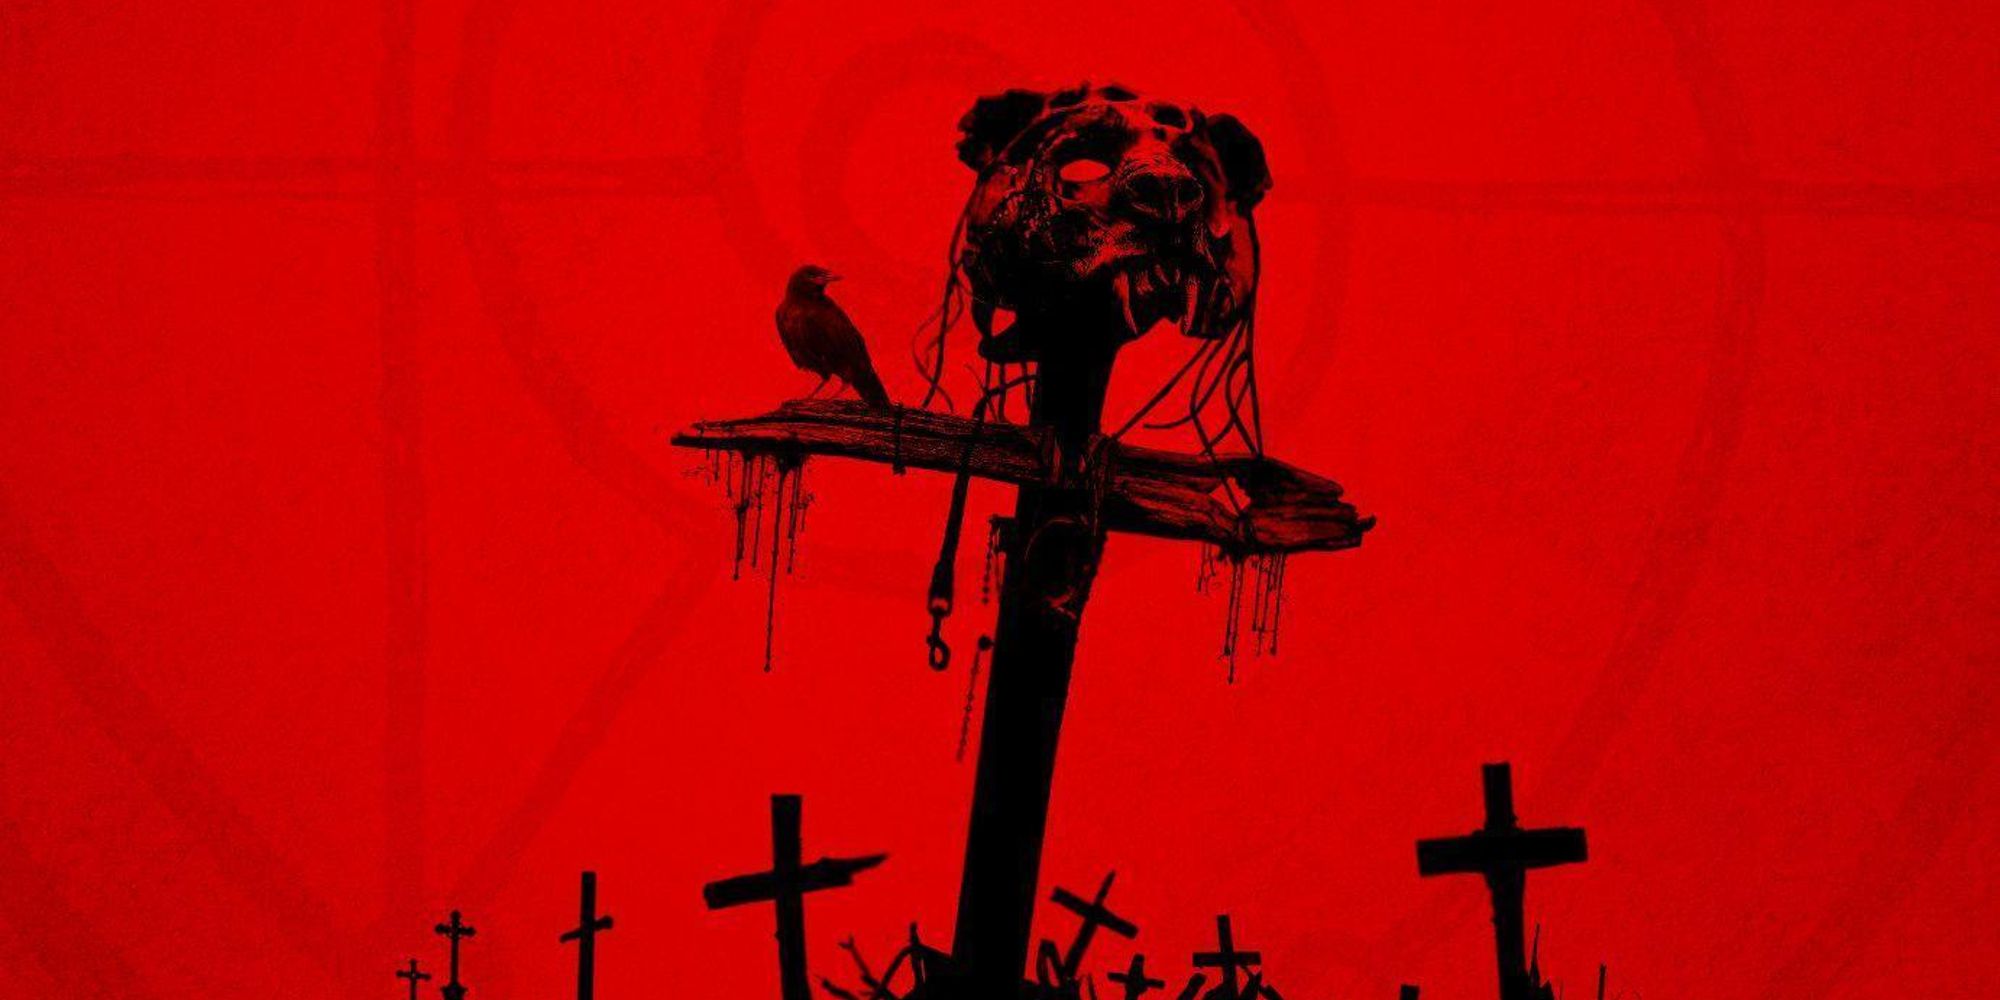 Cross with a cat skull on it from Pet Sematary Bloodlines poster